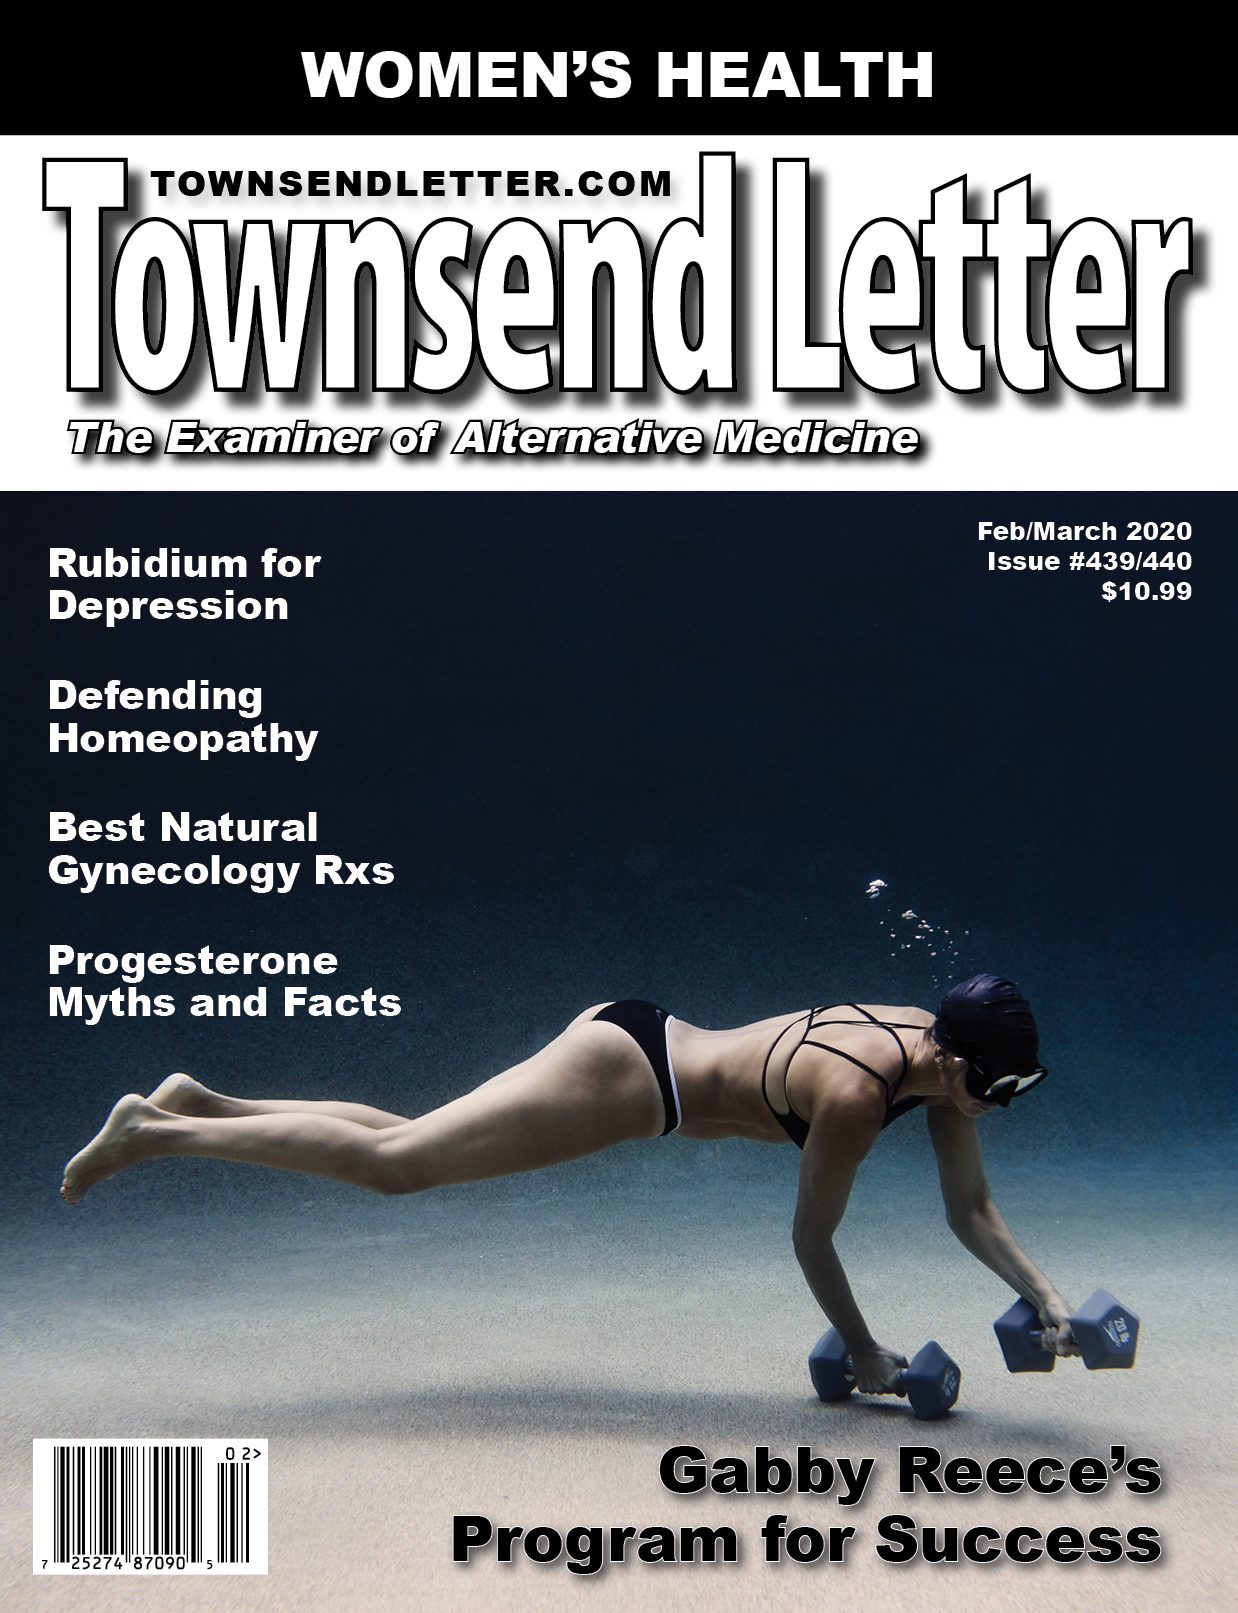 Townsend Letter: The Examiner of Alternative Medicine